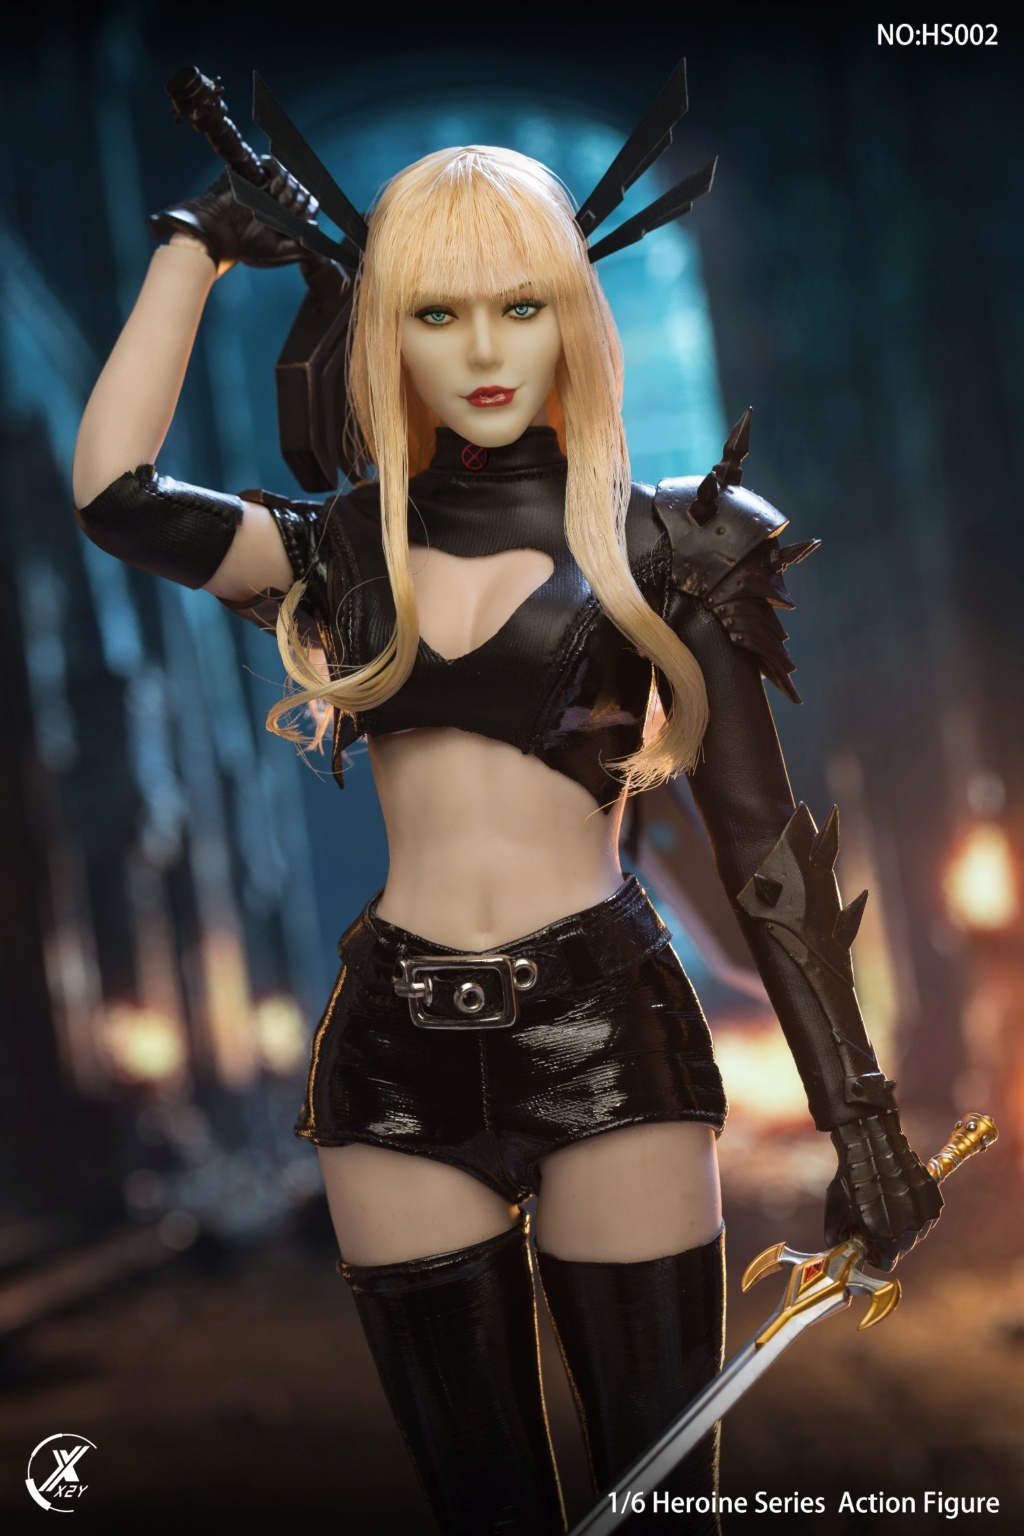 X2YToys - NEW PRODUCT: X2Y TOYS: 1/6 Heroine Series - Mysterious Female Warrior from Hell Double-Headed Female Doll # HS002 11195511